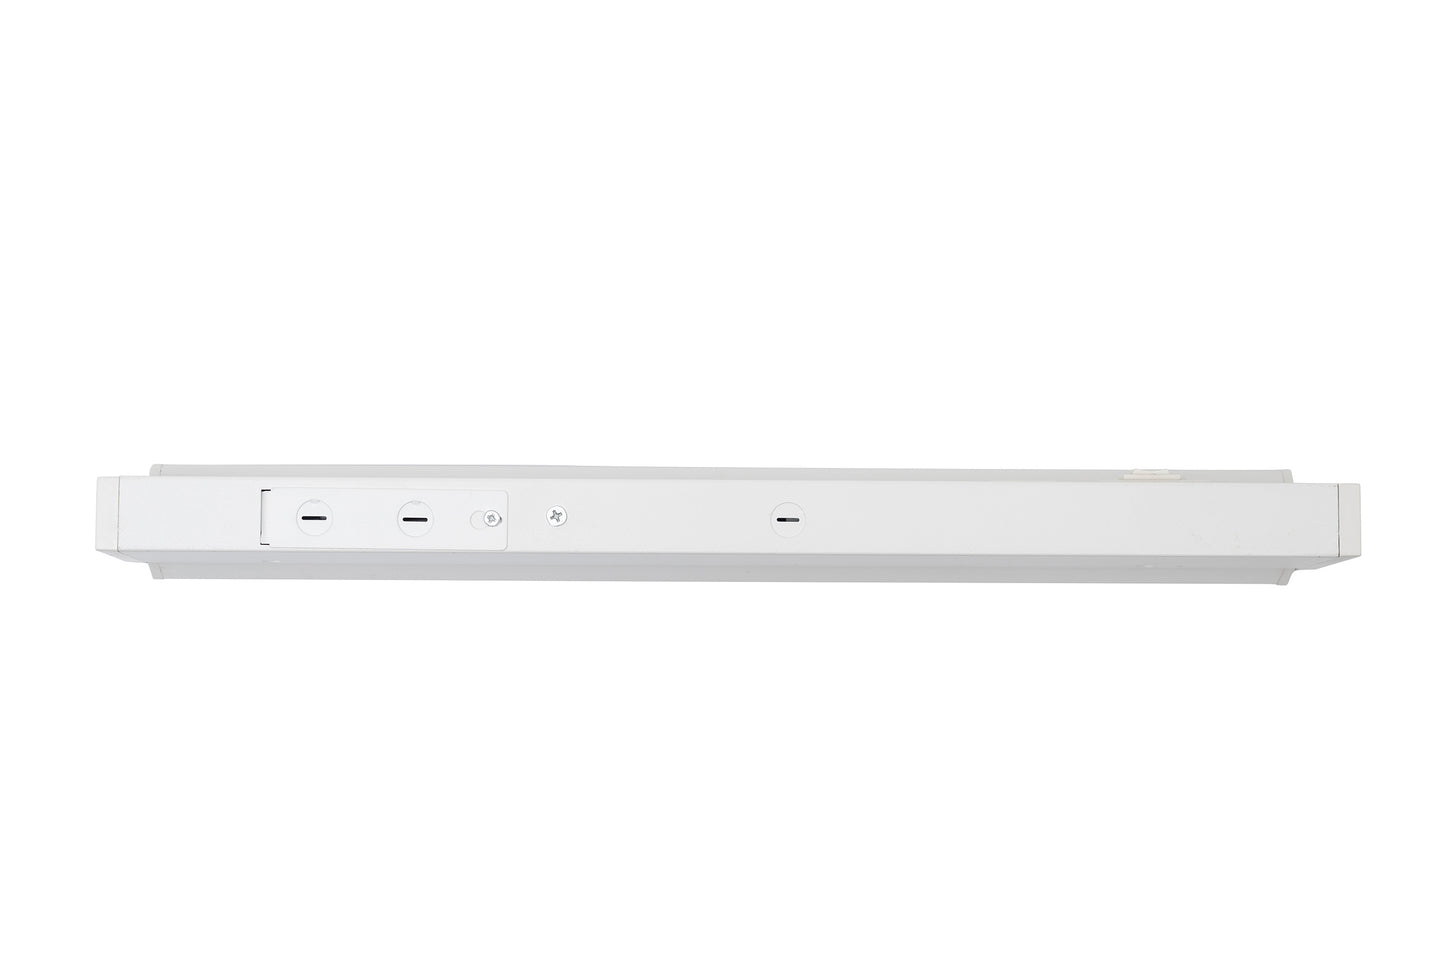 UC22-5K-HL-USB ---------- 22" Swivel Series Fixture, 5-Color Selector Switch 2700/3000/3500/4000/5000, Plug-N-Play or Hardwired, USB-A & C Ports, High/Low/Off Selector